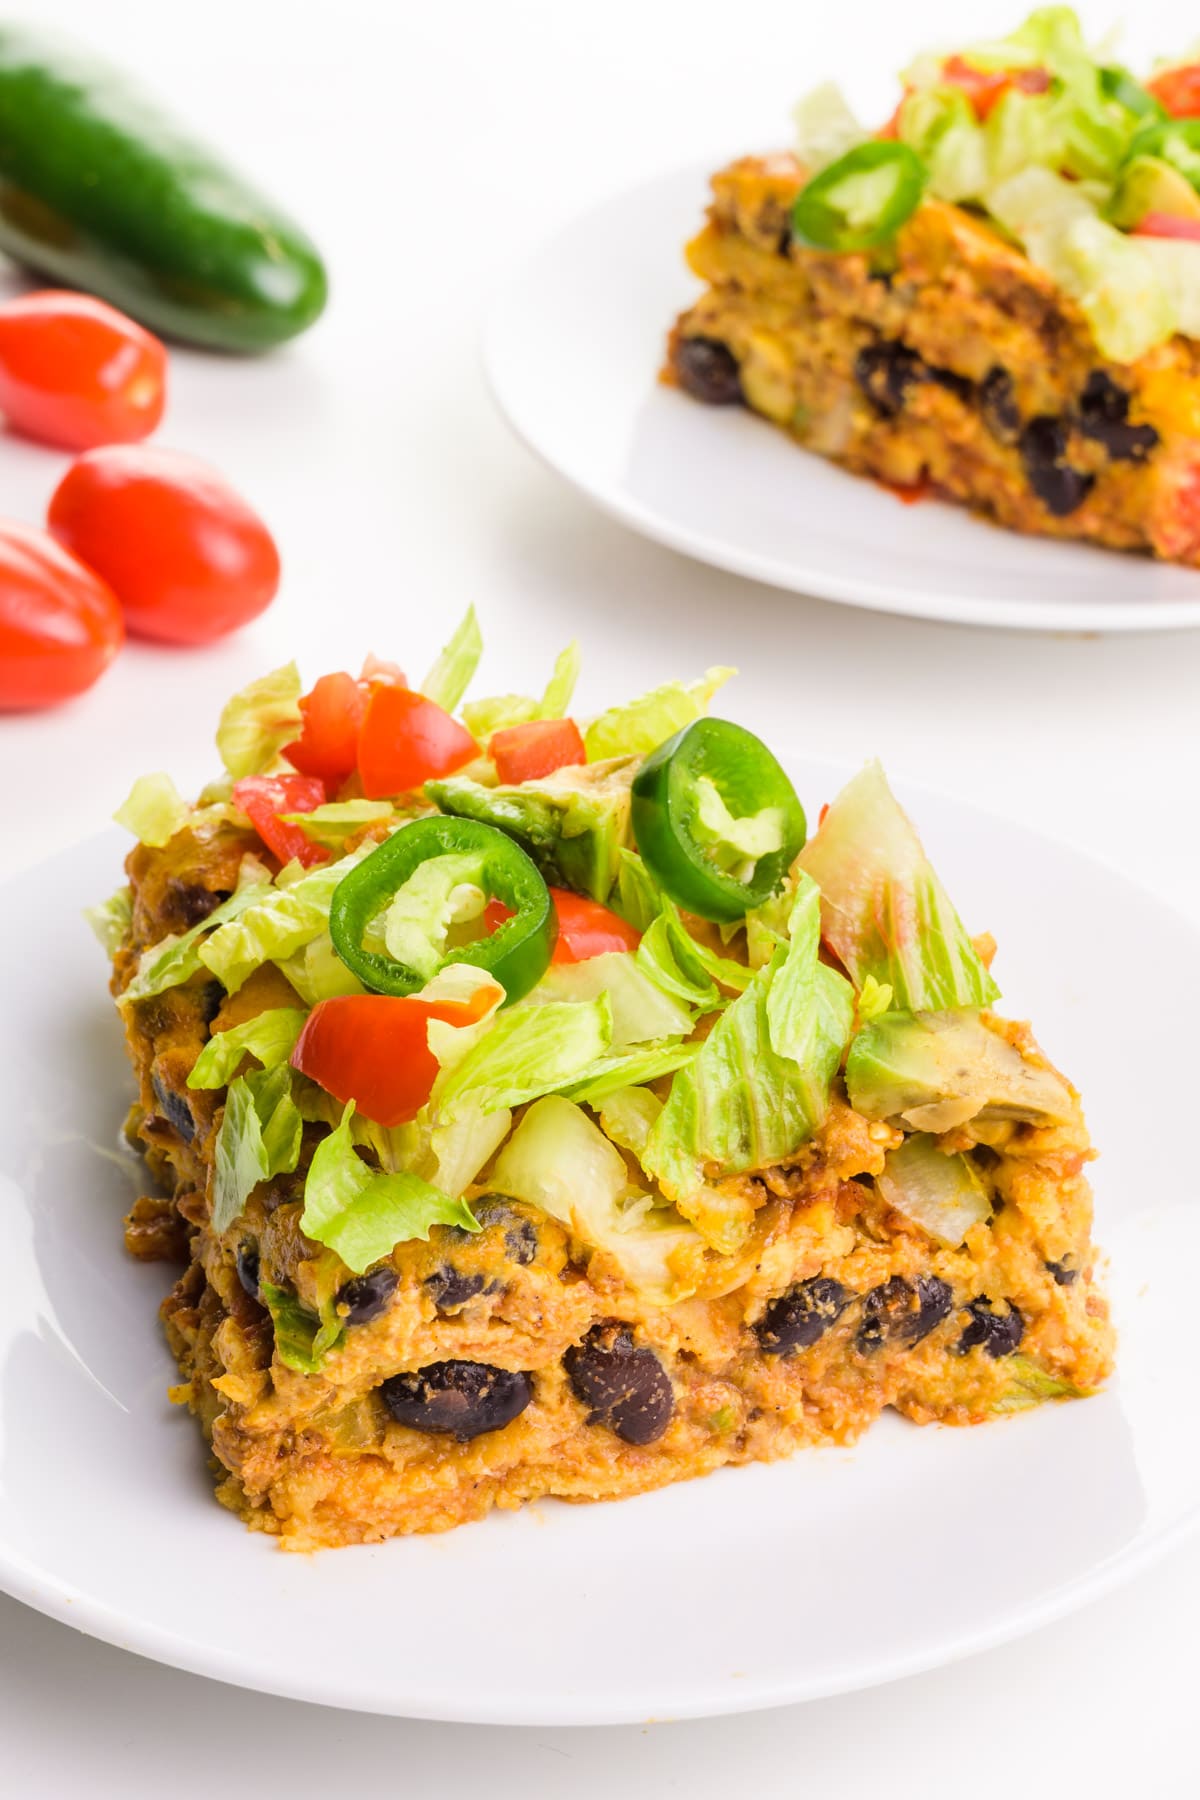 A slice of vegan enchilada casserole sits on a plate. There's another slice on a plate behind it along with some veggies beside it.